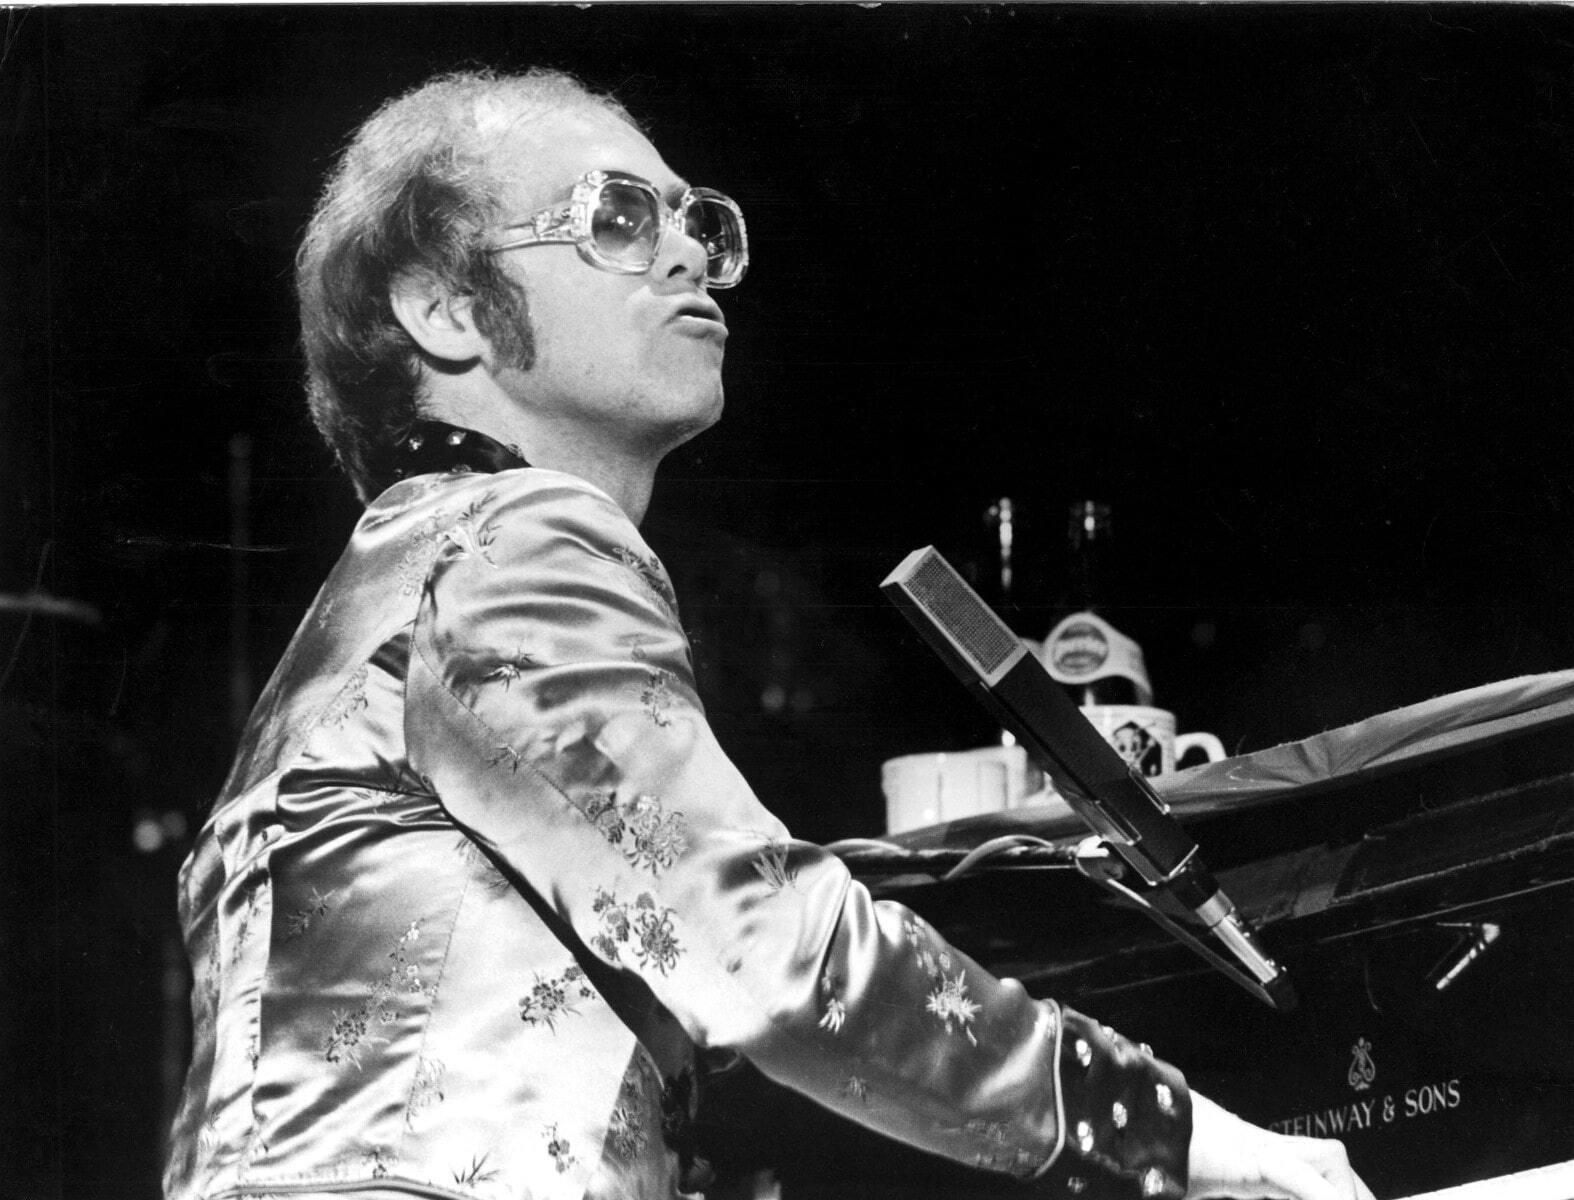 Elton John: The life and career of an icon